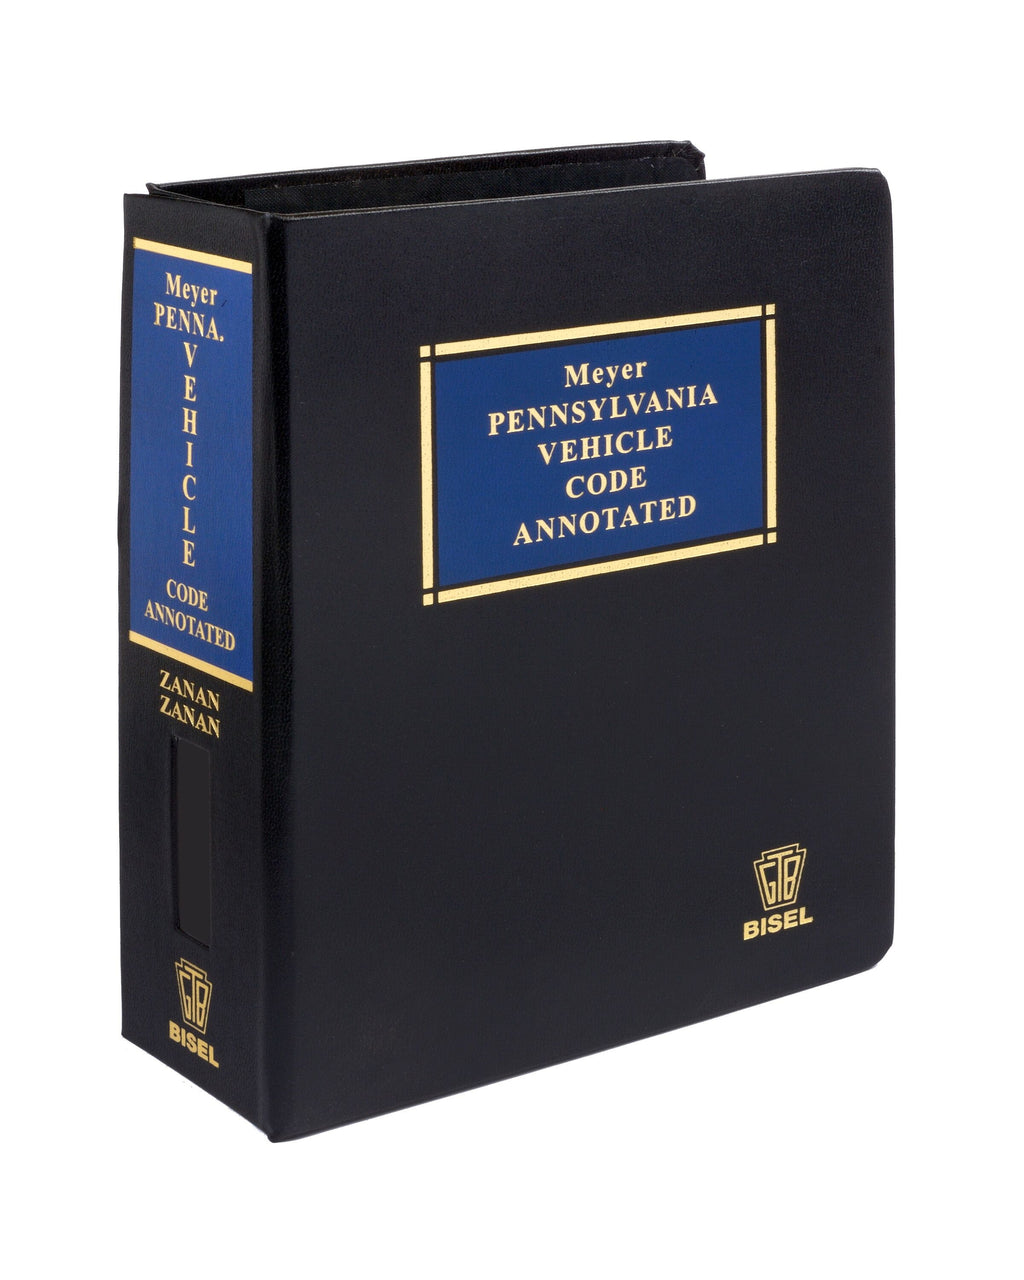 Pennsylvania Vehicle Code Annotated (Includes book + digital download)